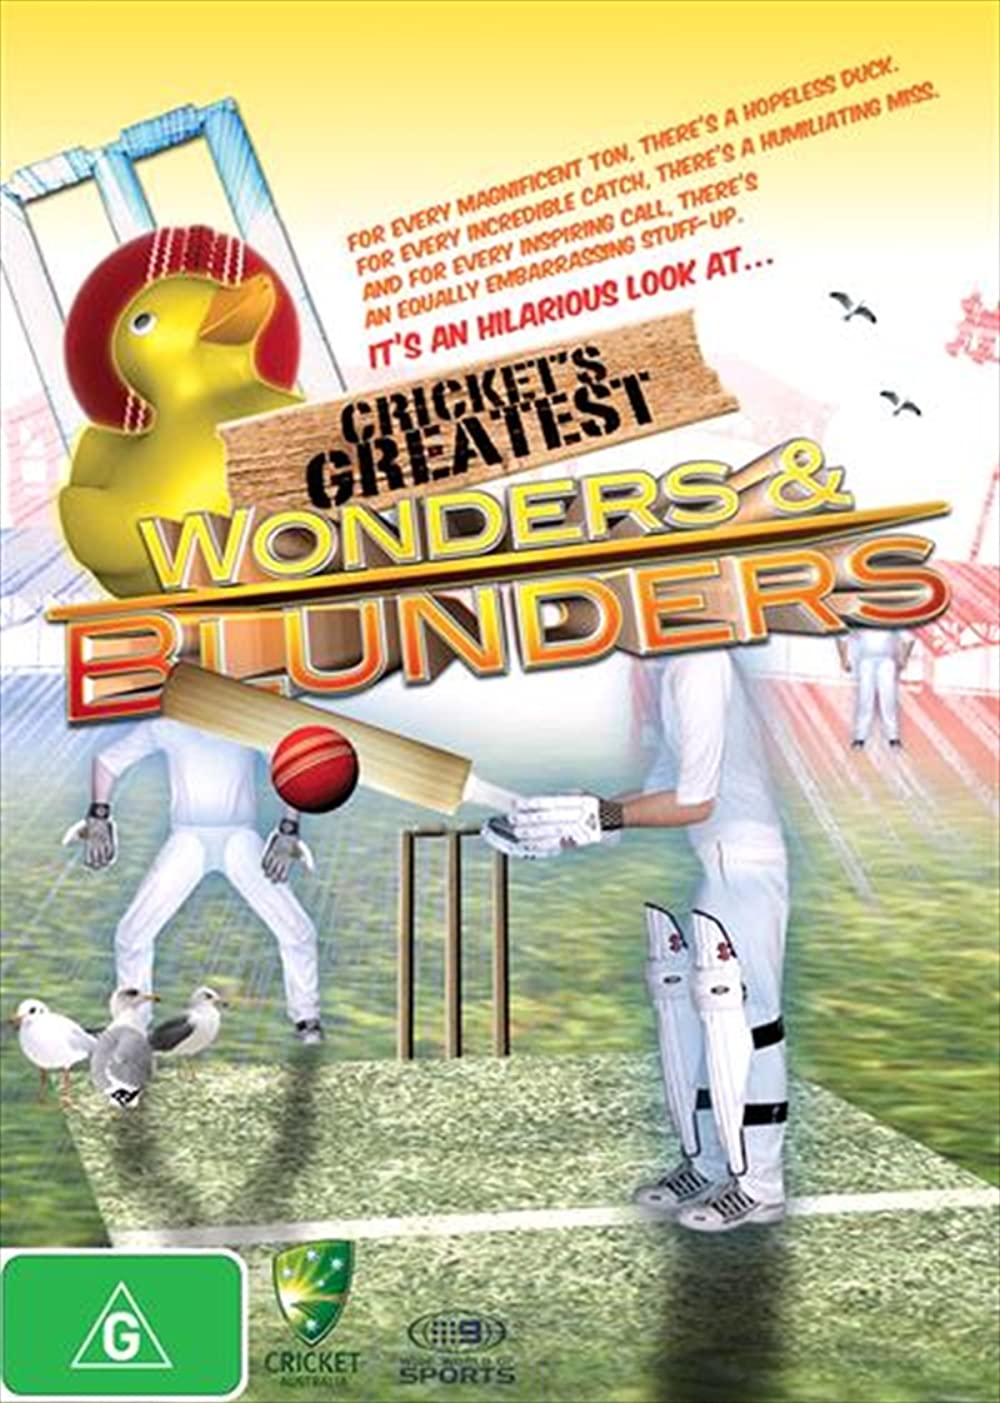 Download Cricket's Greatest Blunders & Wonders Movie | Watch Cricket's Greatest Blunders & Wonders Movie Review